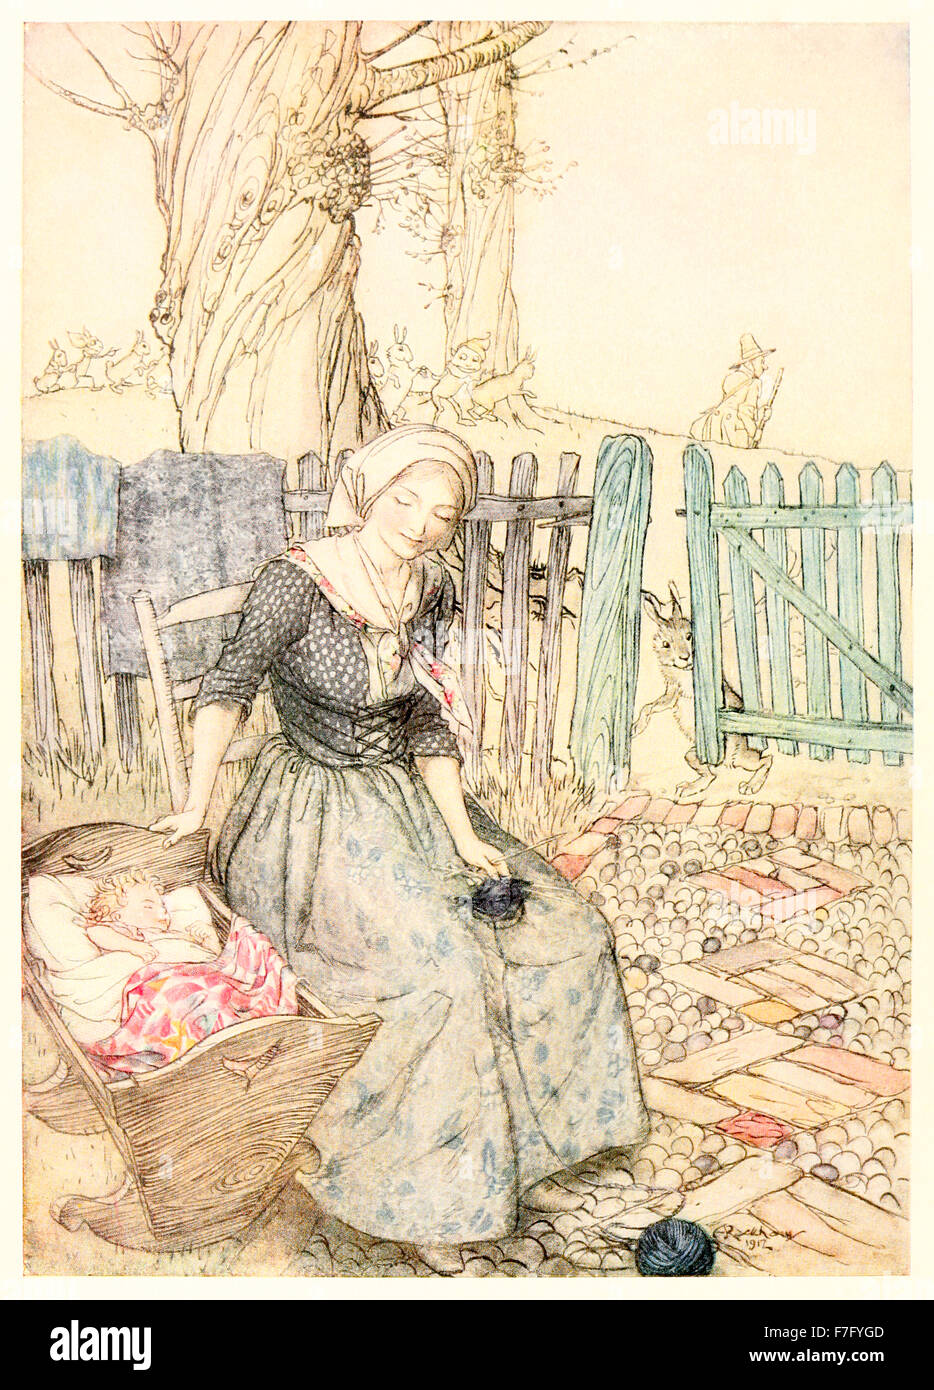 'Bye, Baby Bunting' from 'Mother Goose - The Old Nursery Rhymes' illustration by Arthur Rackham (1867-1939). See description for more information. Stock Photo